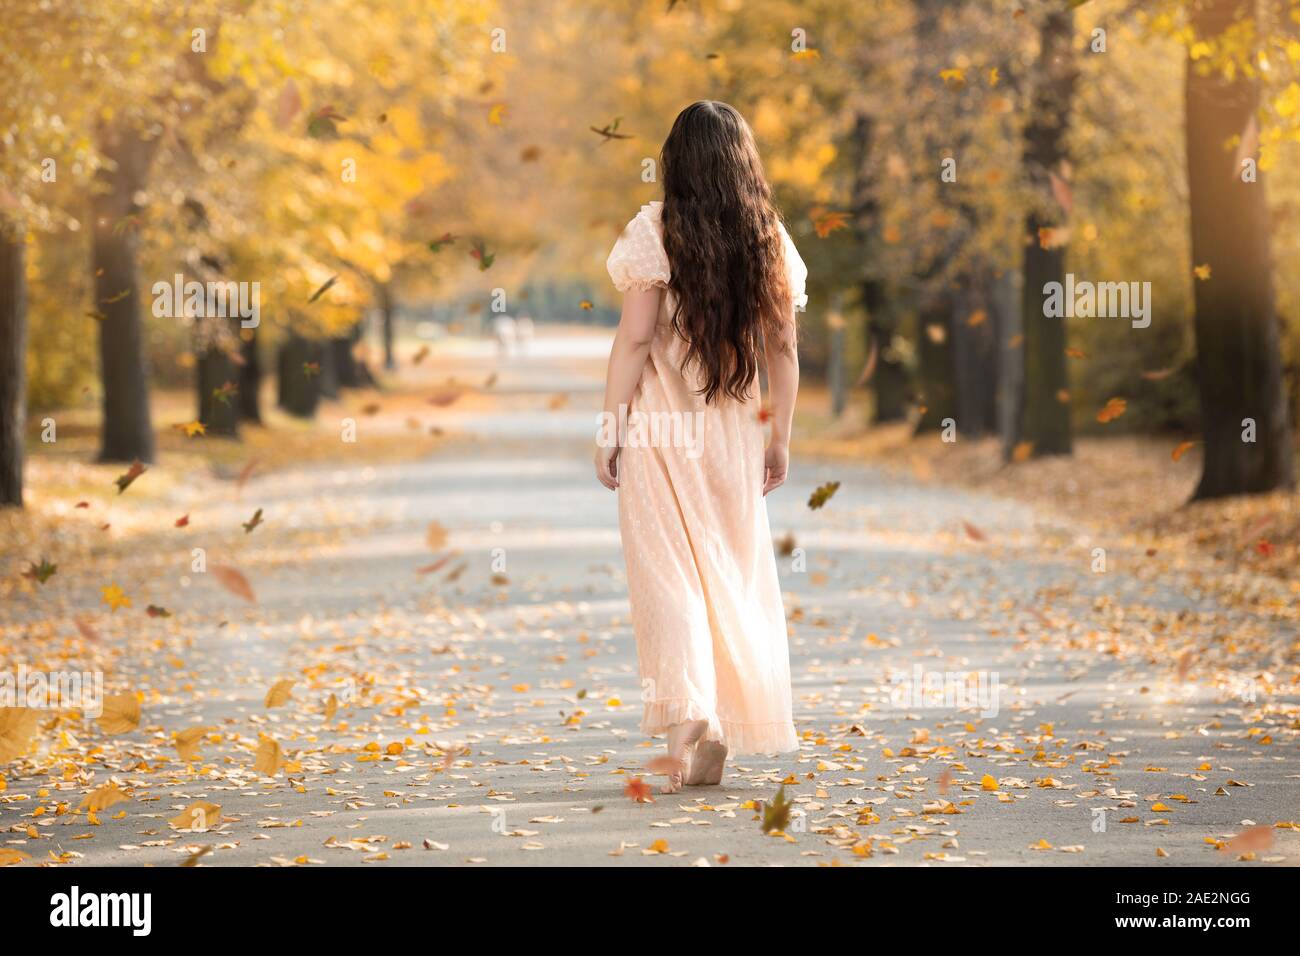 Woman from behind in the autumn park Stock Photo